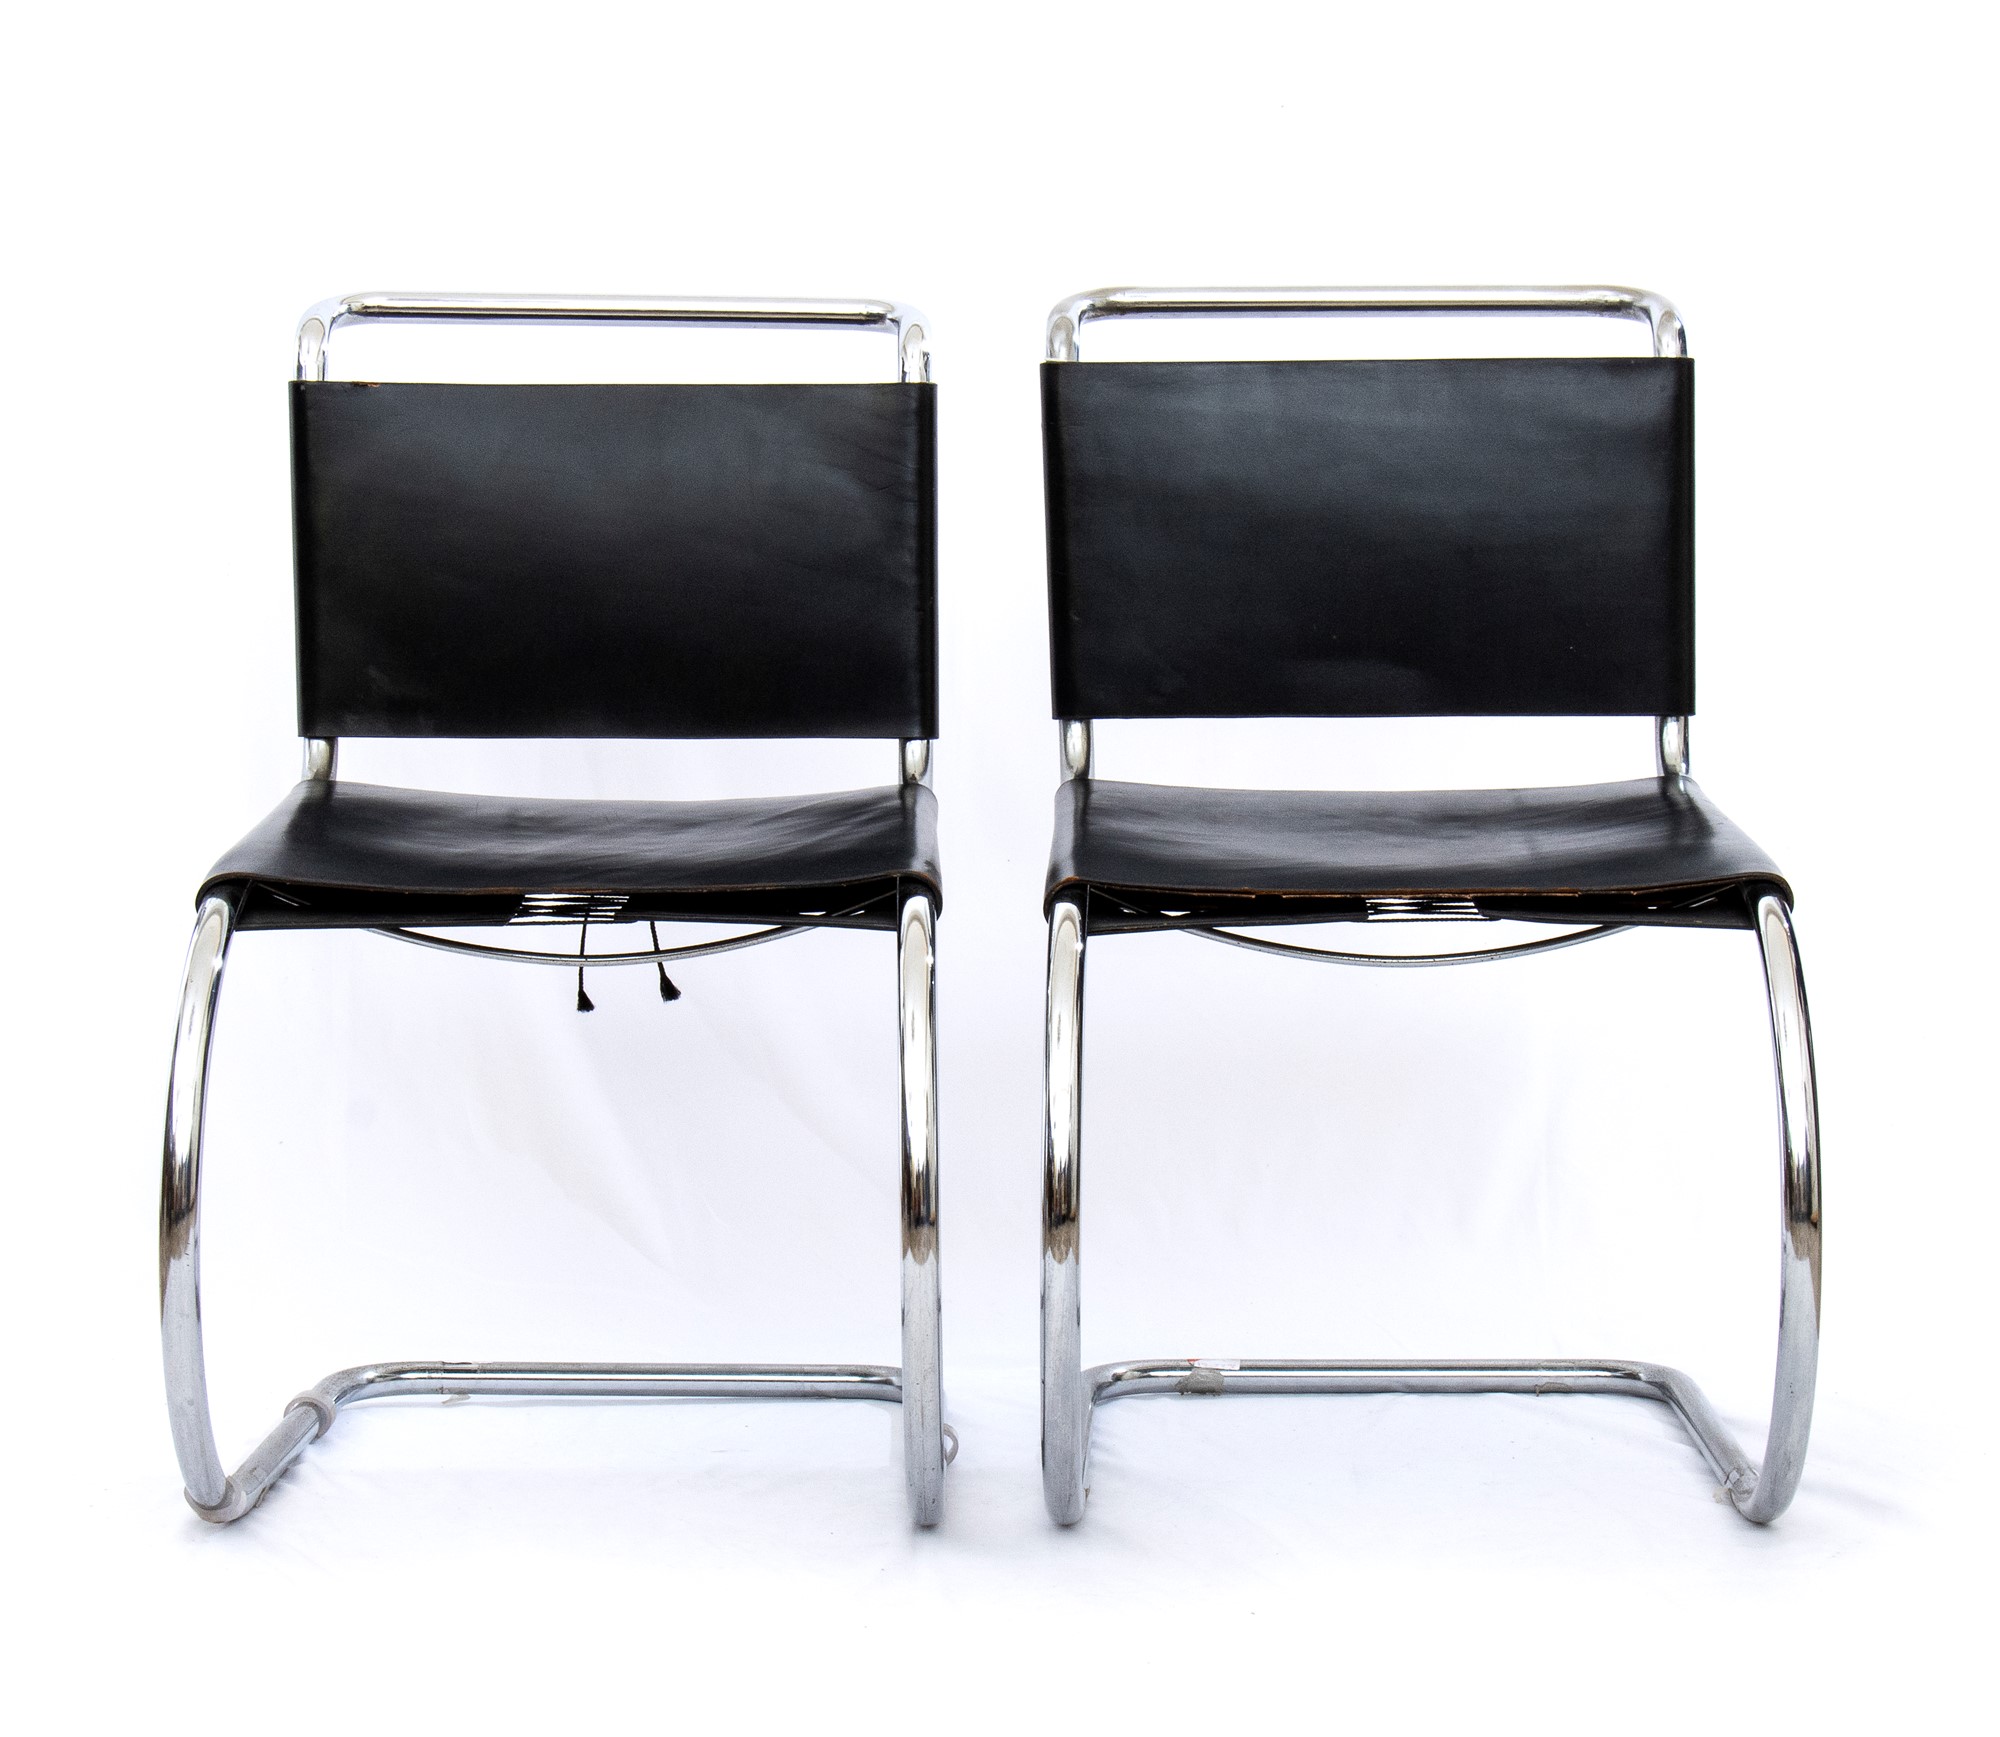 2 chairs in black leather and steel designed by Mart Stam and Marcer Beuer - Image 5 of 19